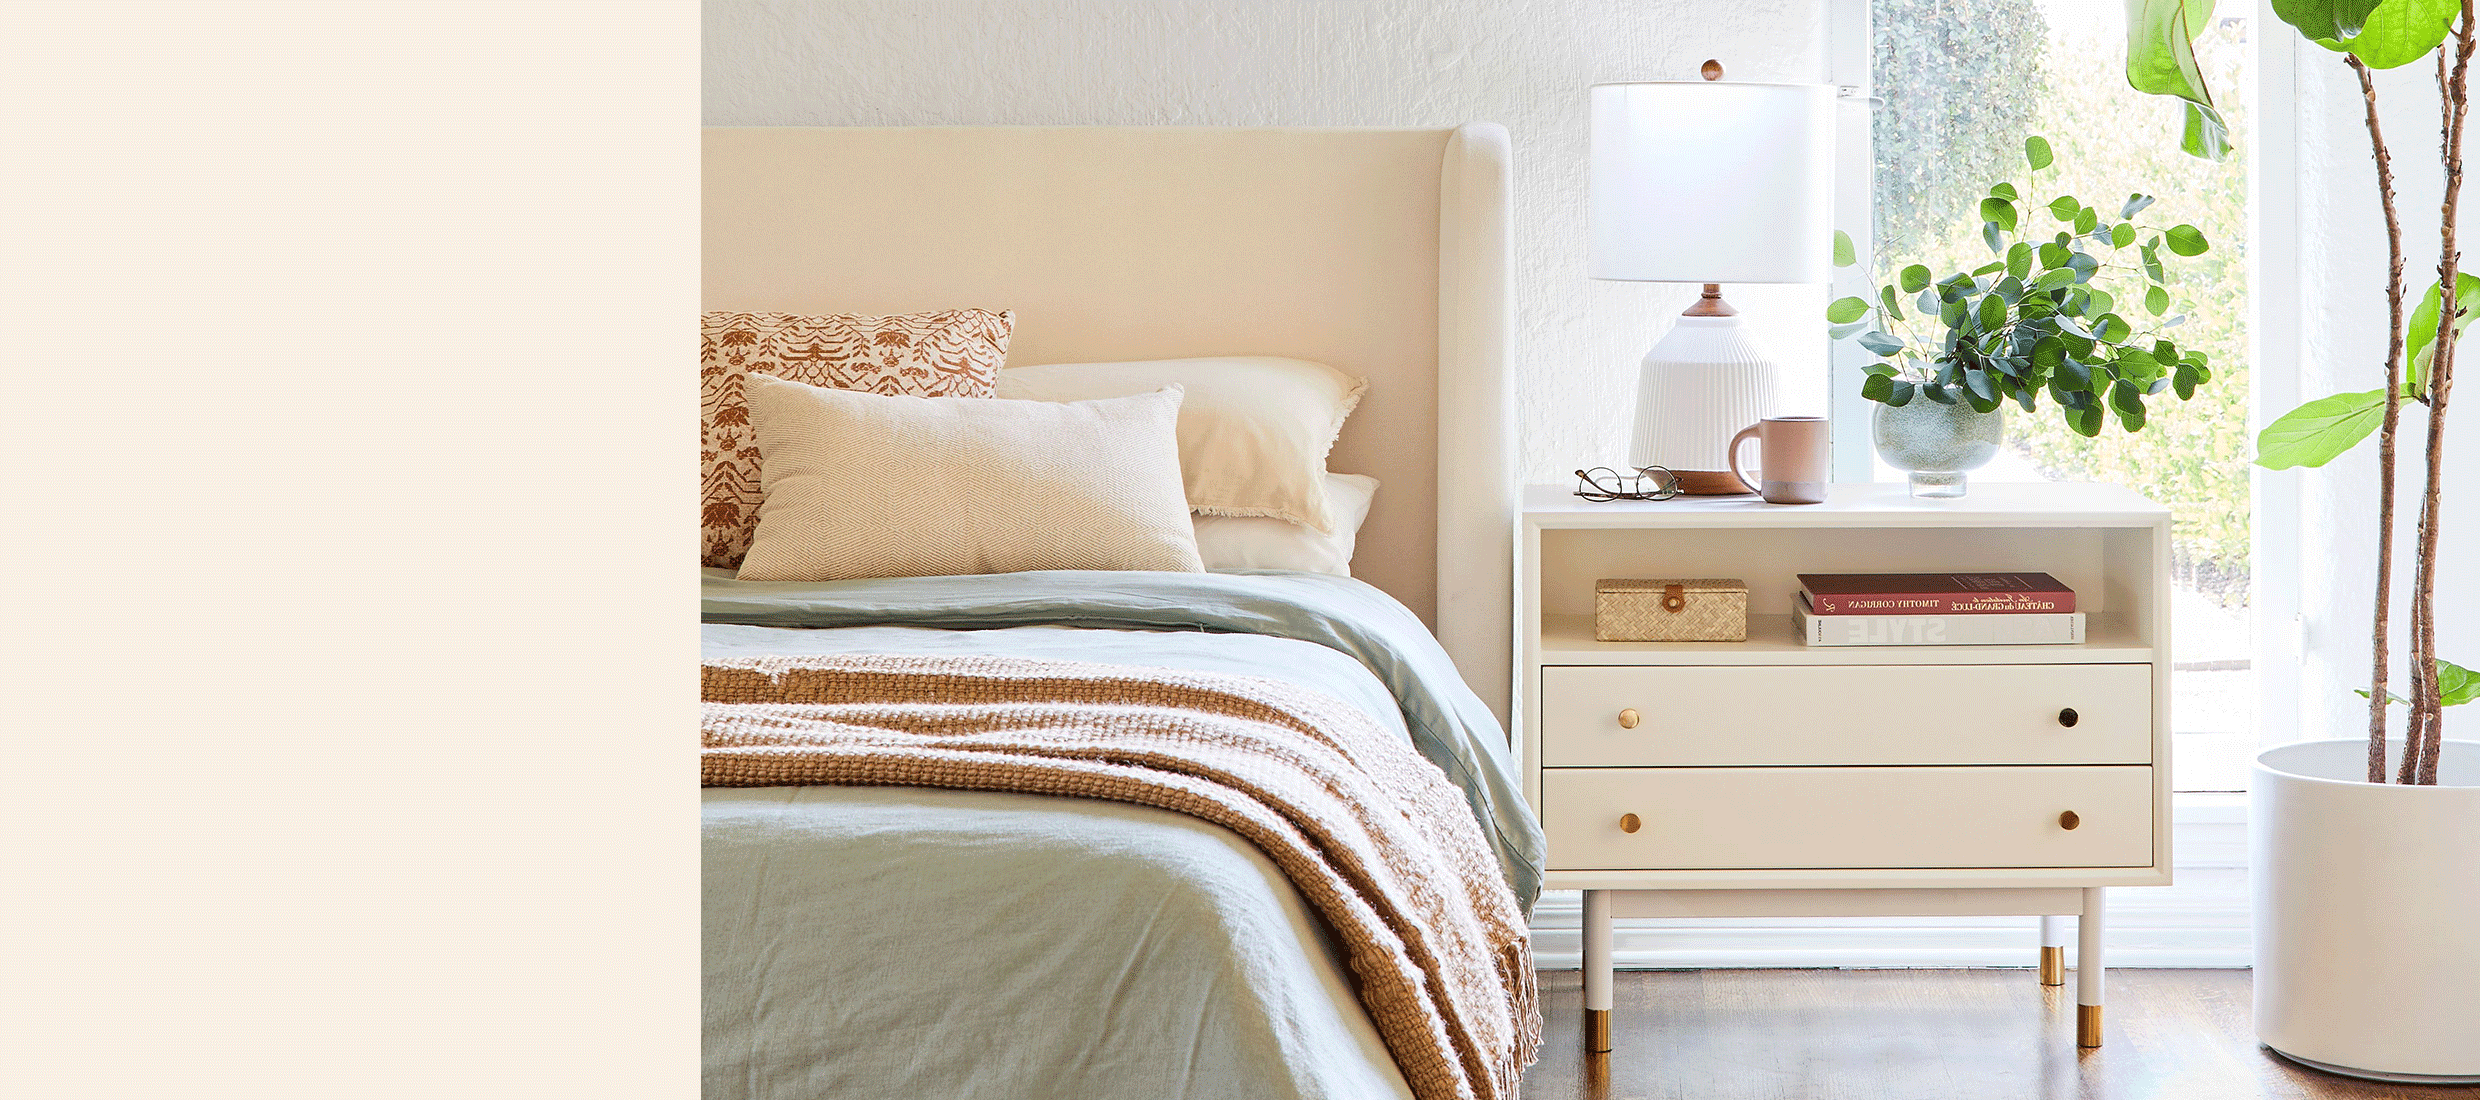 A beige upholstered headboard with beige and rust throw pillows, a clay colored blanket, a sage green duvet cover. At the right, a wide white and brass nightstand with two drawers. Atop, a white and wood table lamp and a vase with greener.